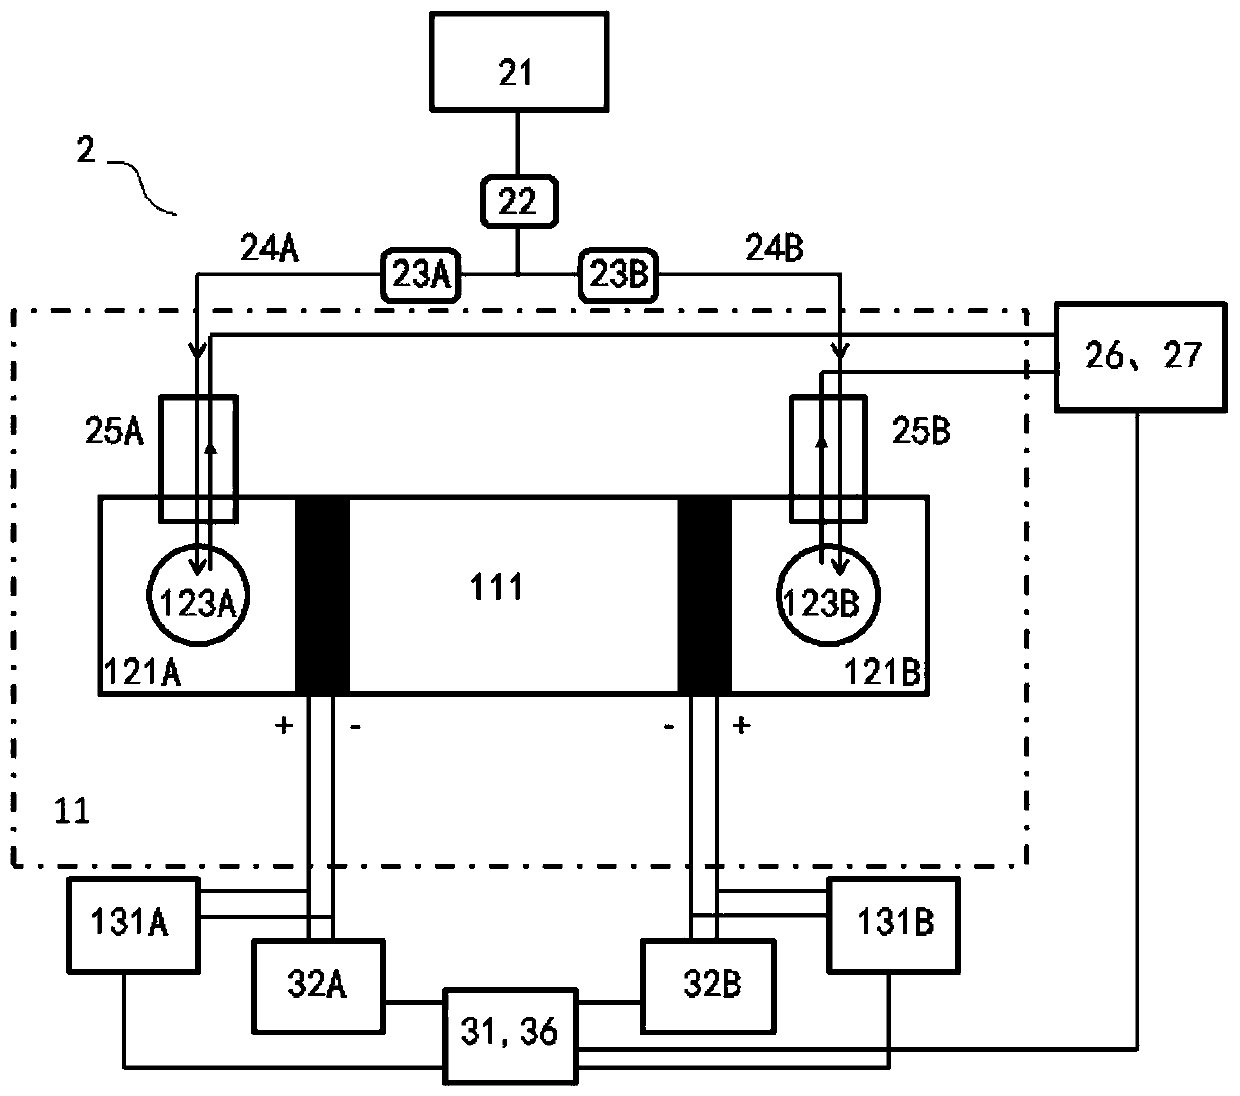 Thermal power measurement device with Raman spectroscopy measurement function